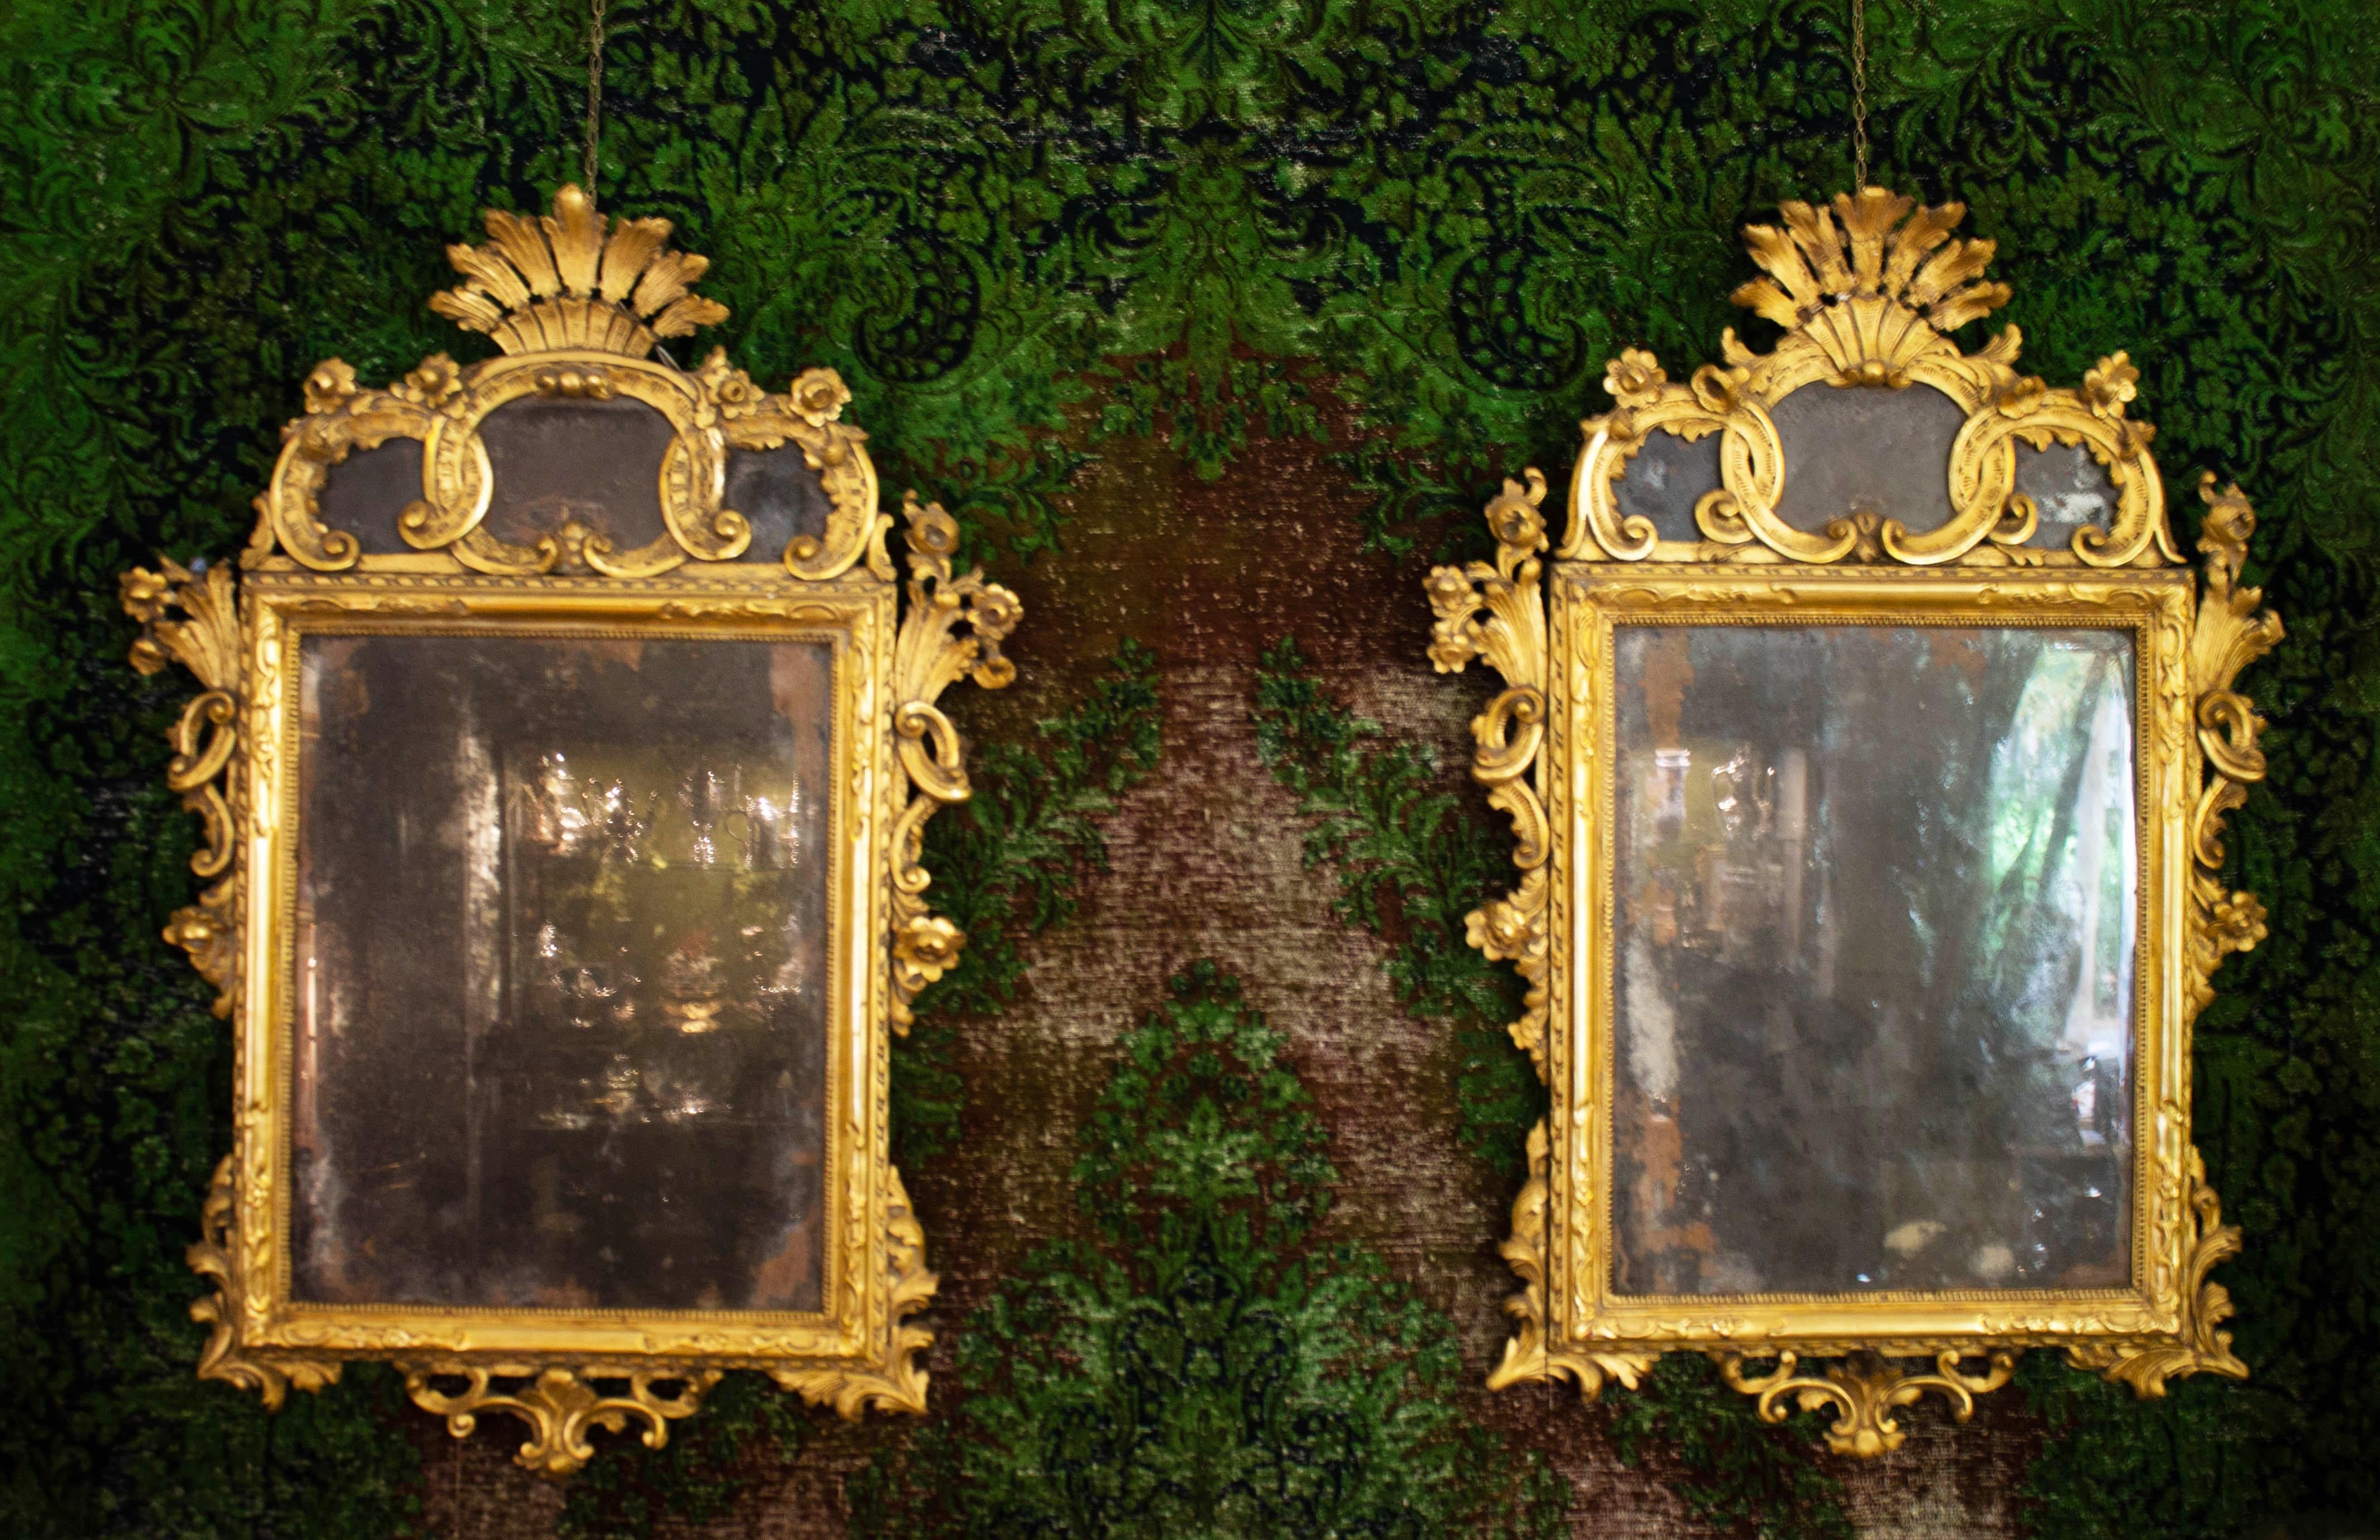 Italian Pair of Carved and Gilded Wooden Mirrors from the 18th Century Made in Sicily